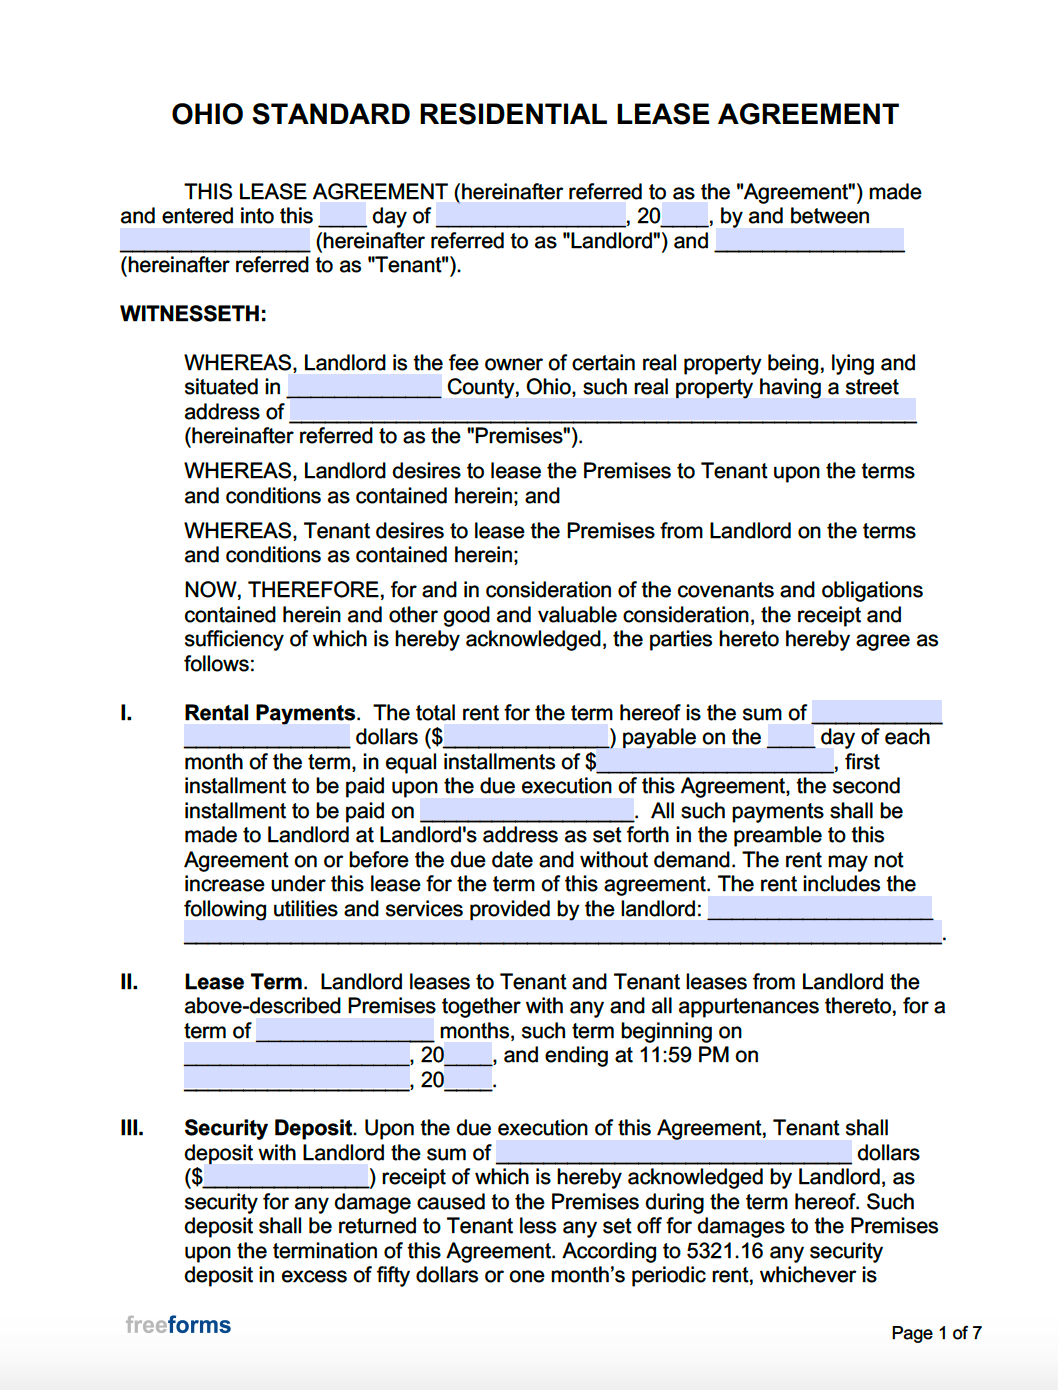 ohio-standard-residential-lease-agreement-printable-form-templates